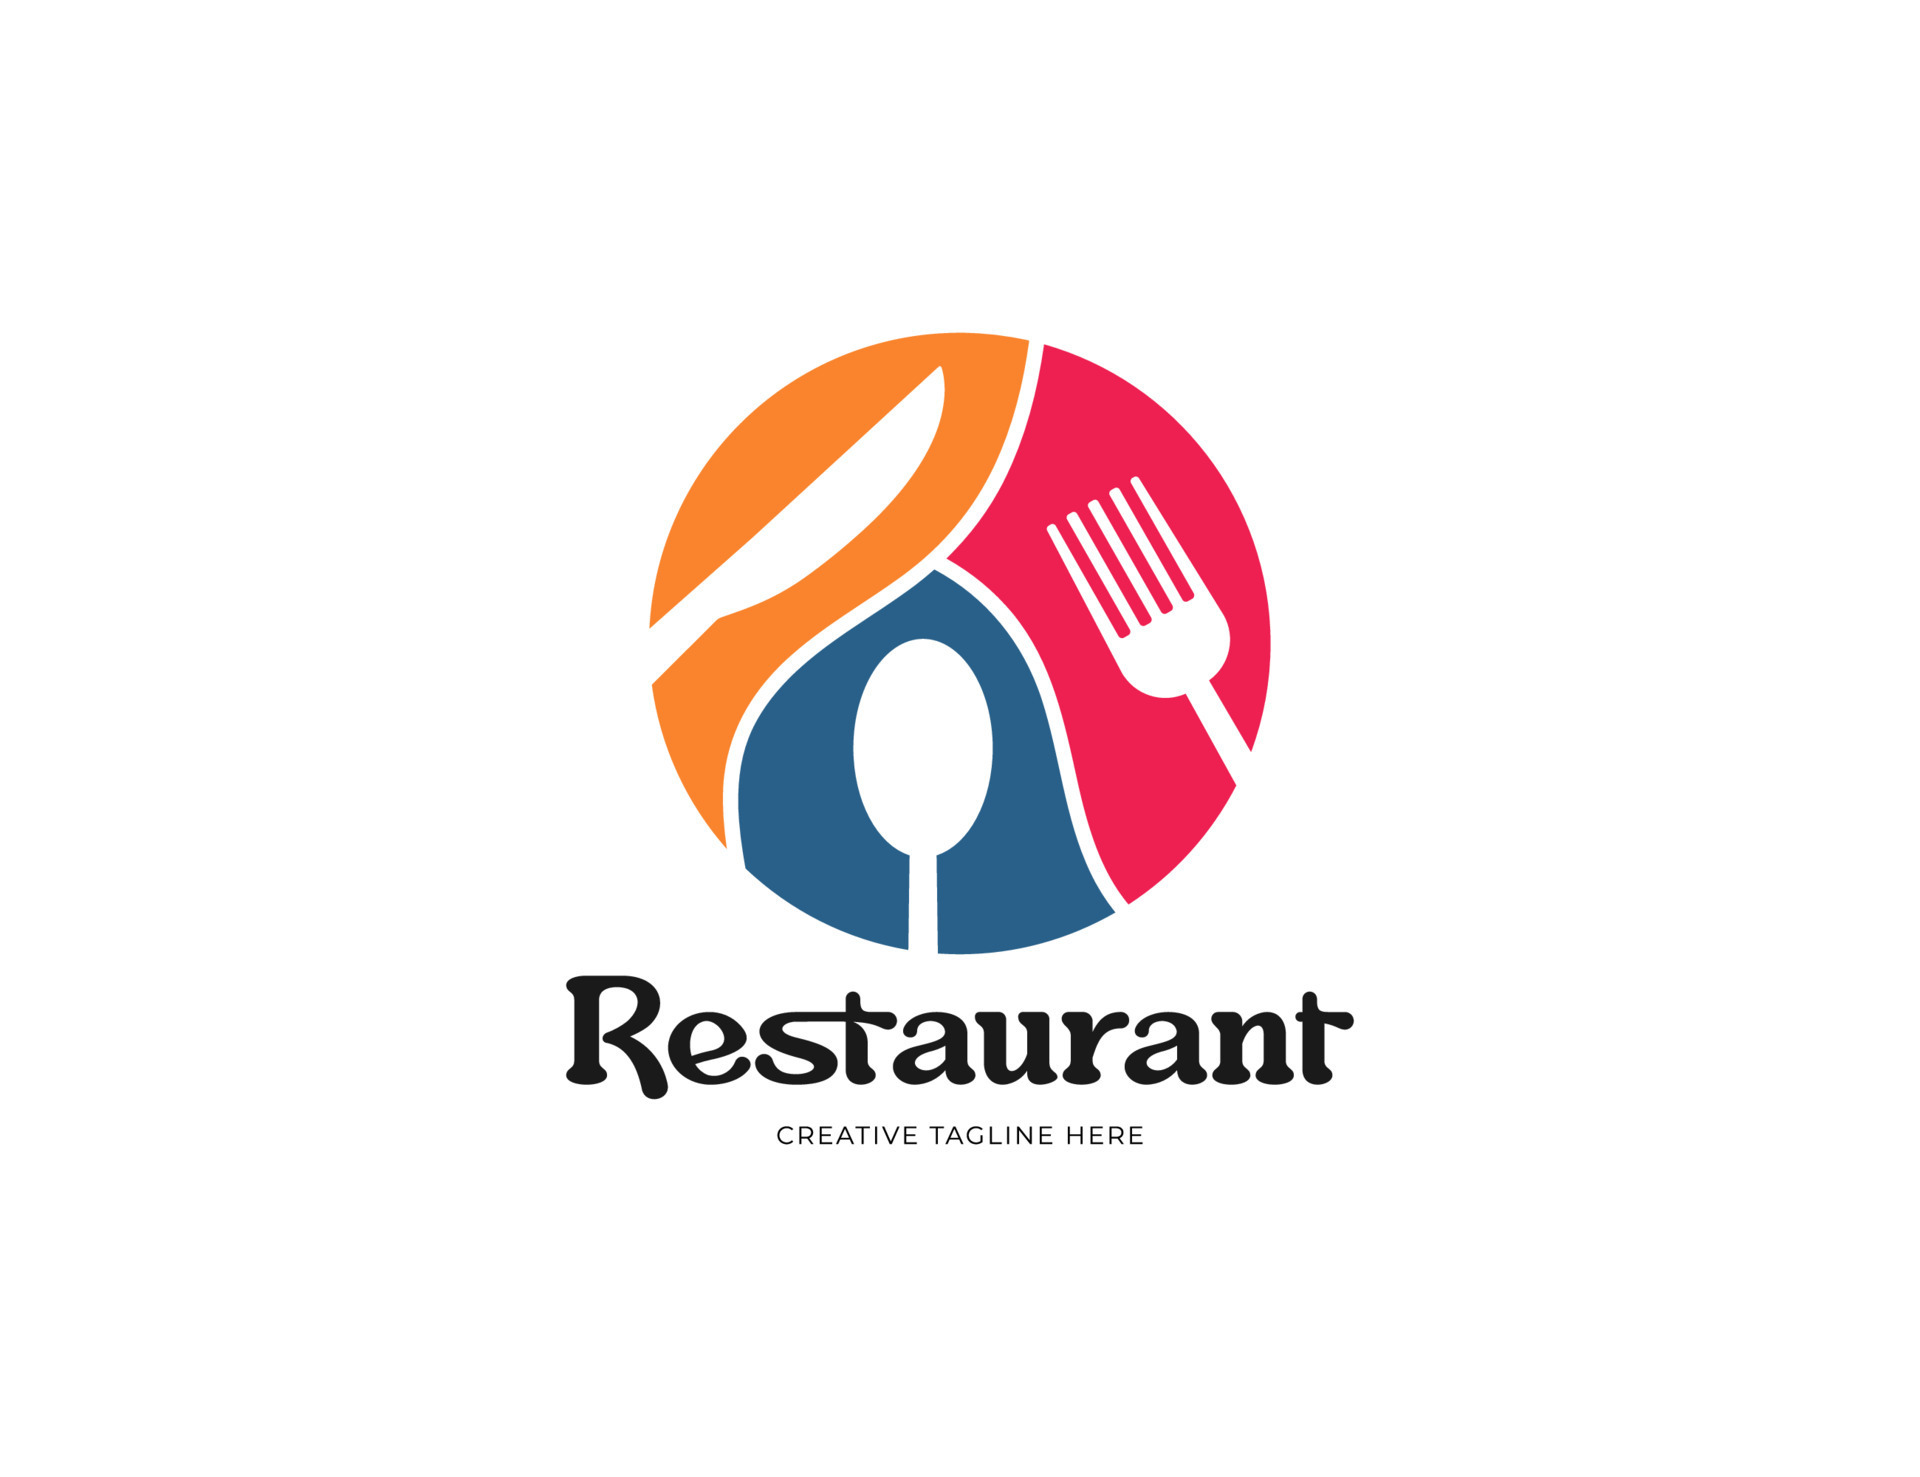 Restaurant logo with fork knife and spoon illustration 11815323 Vector ...